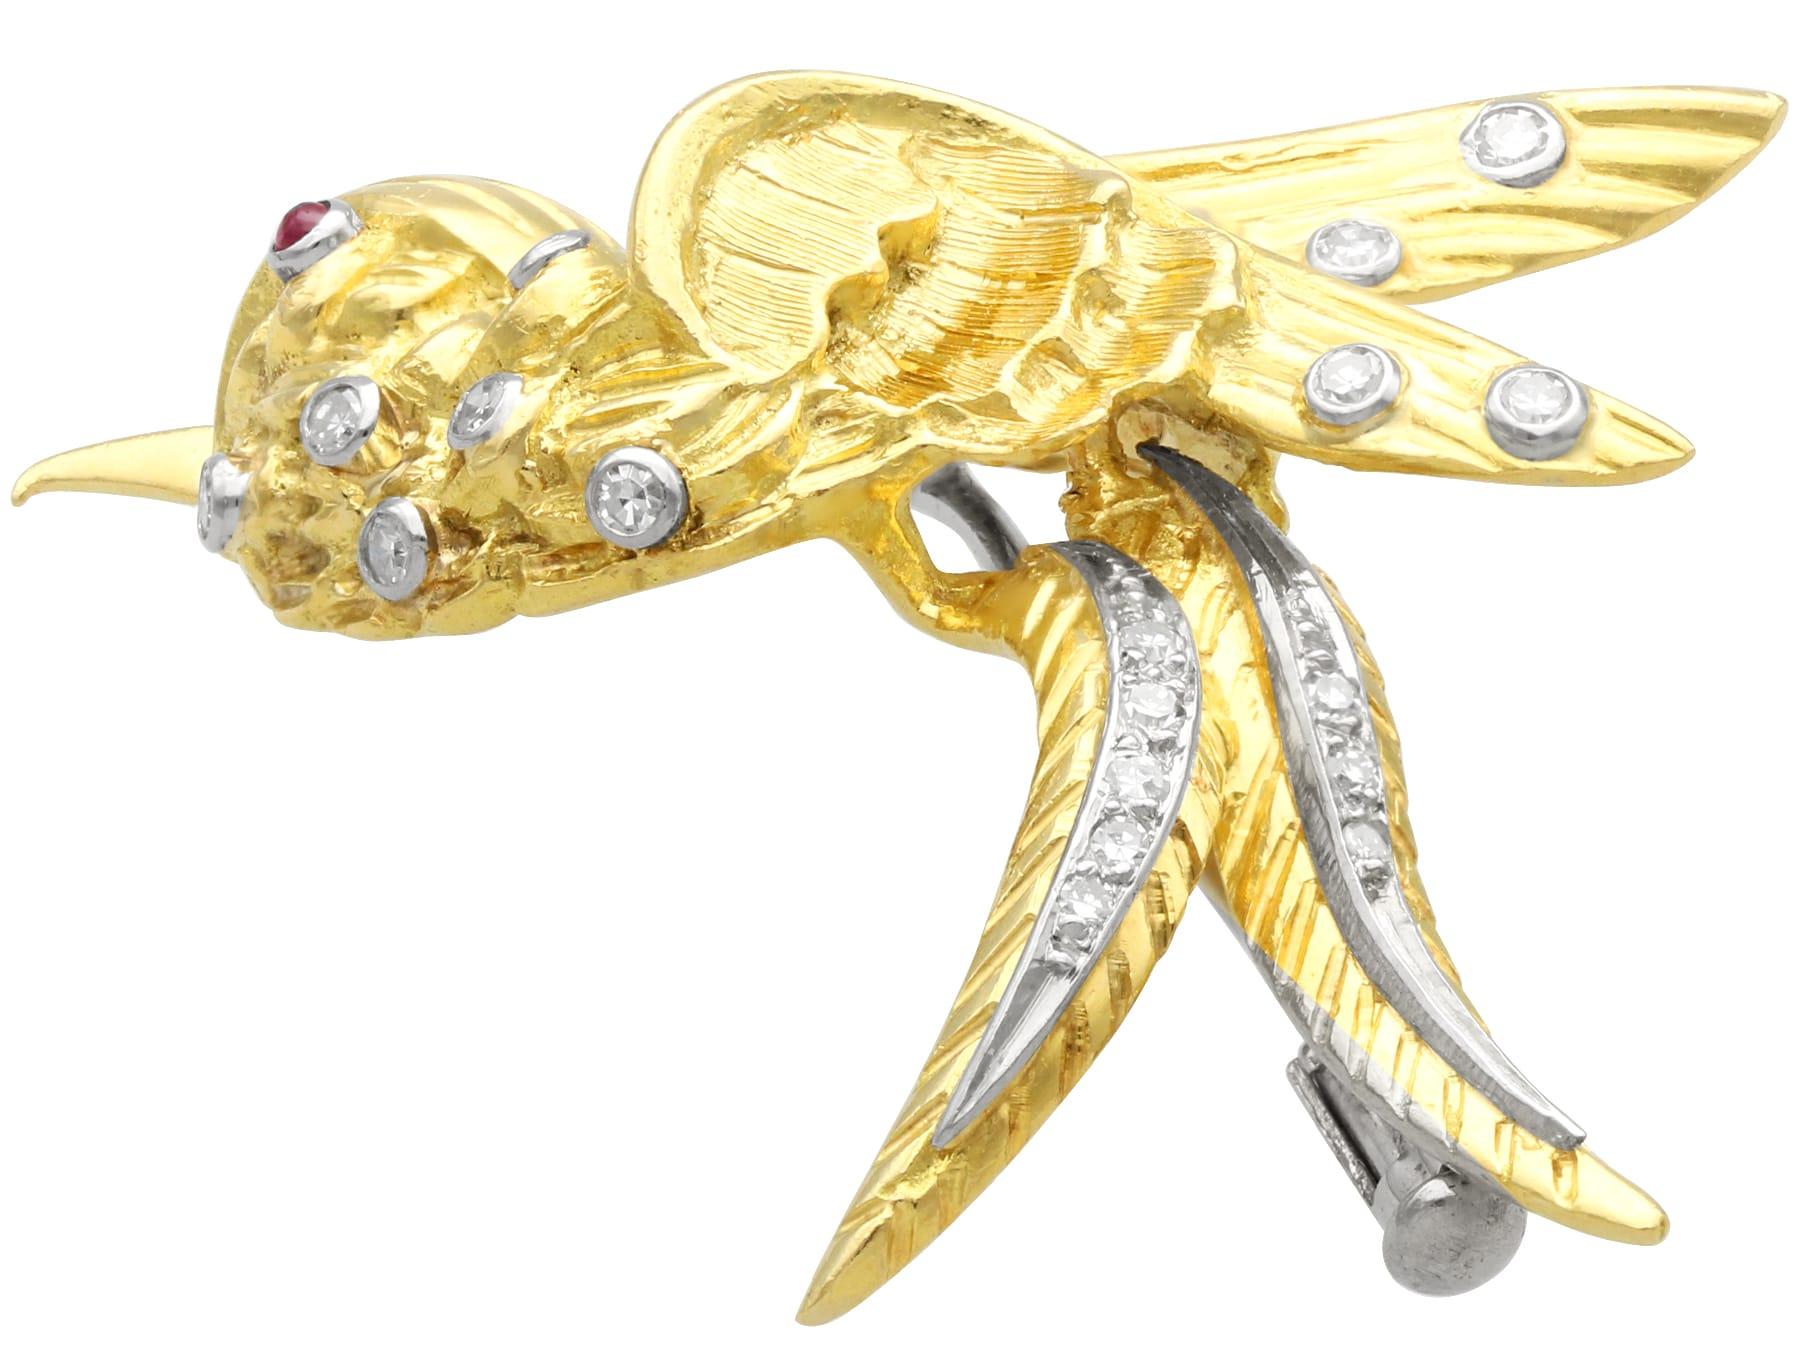 Antique 0.19 Carat Diamond and Ruby 18k Yellow Gold Bird Brooch In Excellent Condition For Sale In Jesmond, Newcastle Upon Tyne